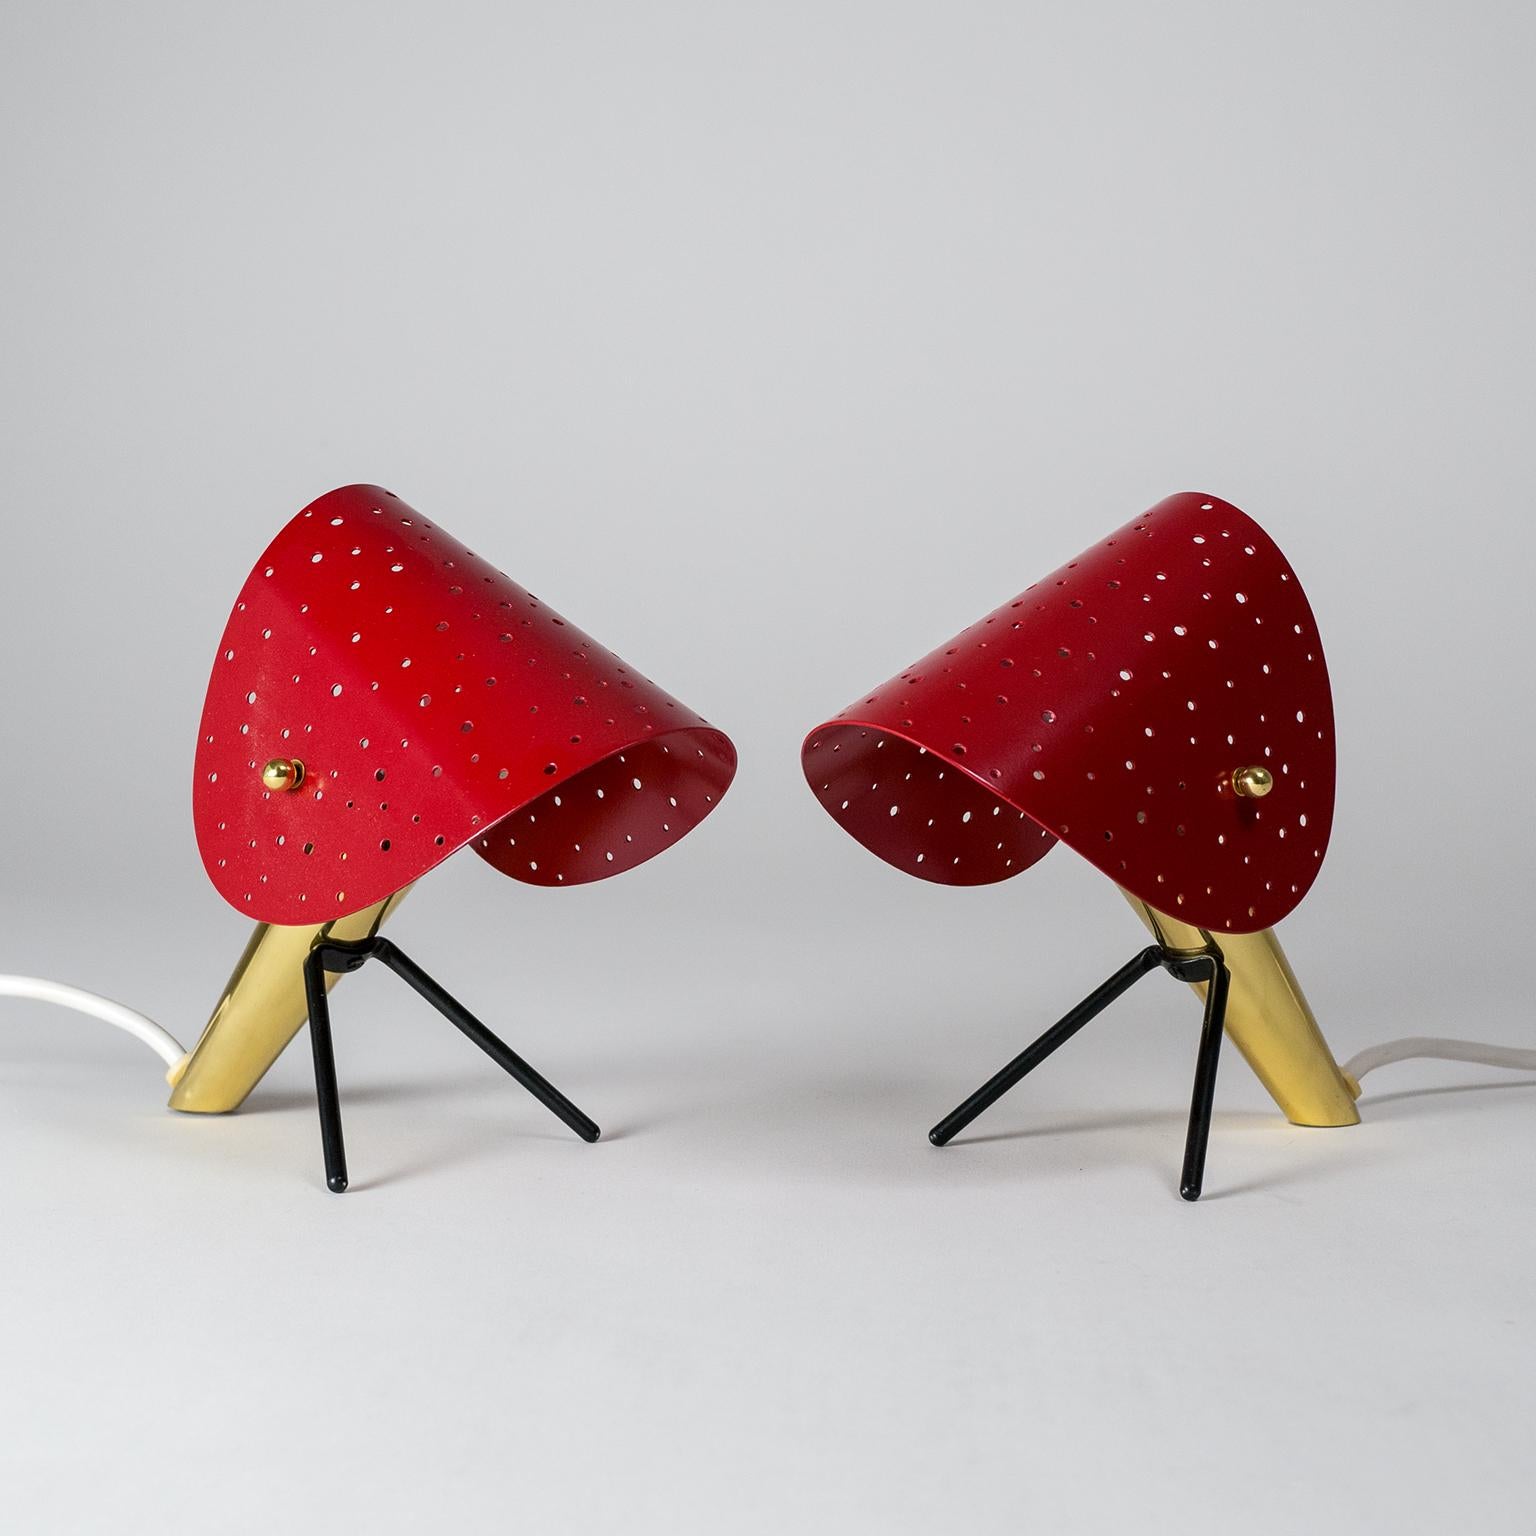 German Pair of Brass Table Lamps with Perforated Shades by Ernest Igl, 1950s